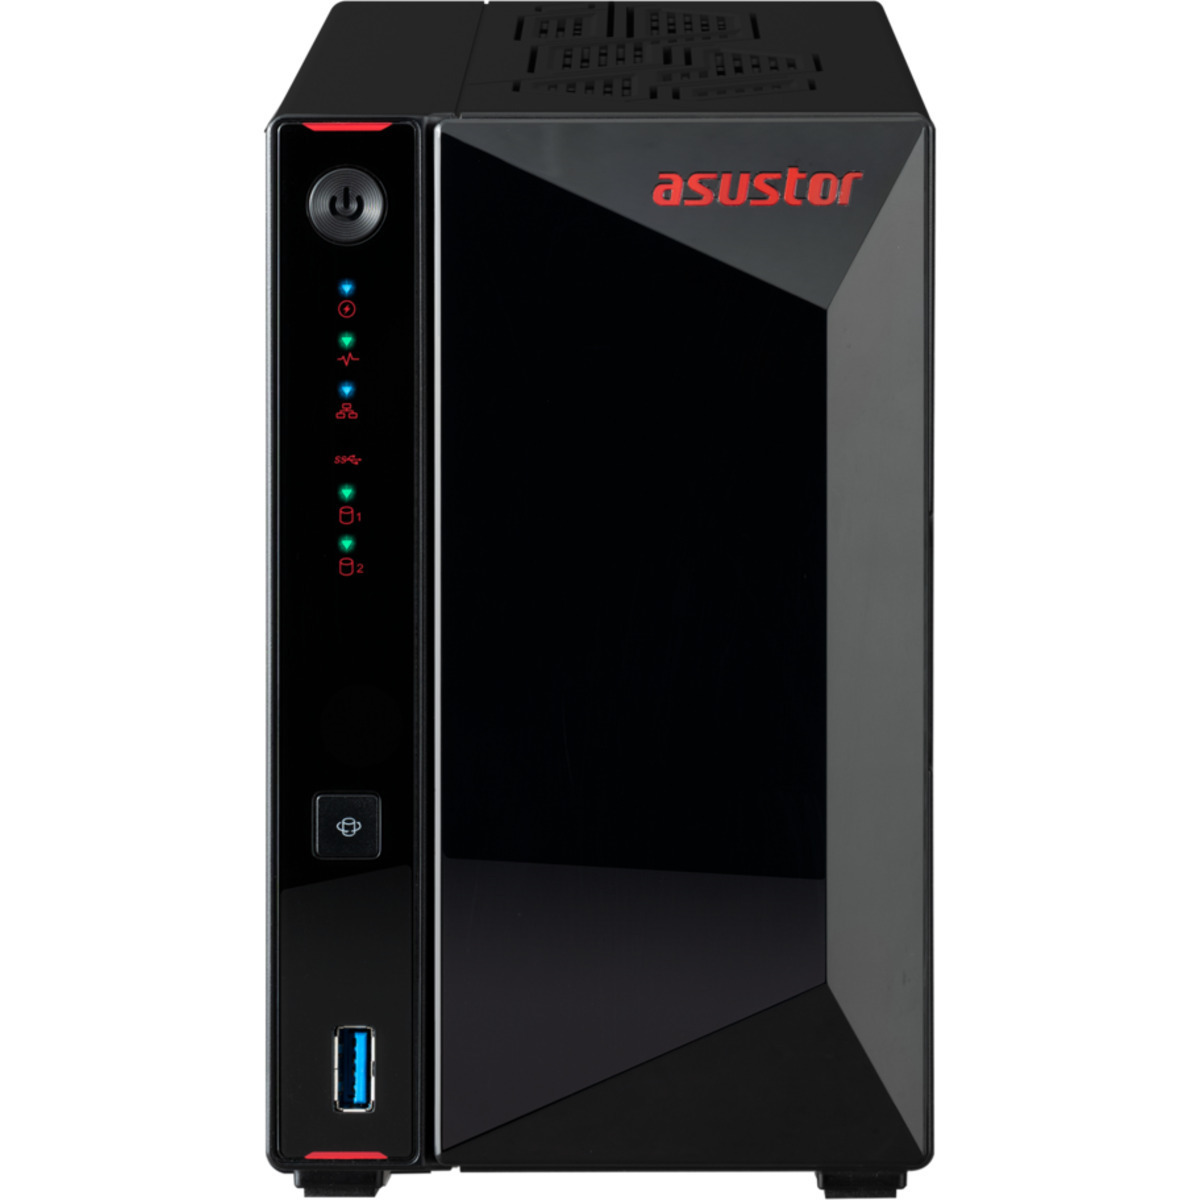 buy $1084 ASUSTOR Nimbustor 2 Gen2 AS5402T 32tb Desktop NAS - Network Attached Storage Device 2x16000gb Toshiba Enterprise Capacity MG08ACA16TE 3.5 7200rpm SATA 6Gb/s HDD ENTERPRISE Class Drives Installed - Burn-In Tested - FREE RAM UPGRADE - nas headquarters buy network attached storage server device das new raid-5 free shipping simply usa Nimbustor 2 Gen2 AS5402T